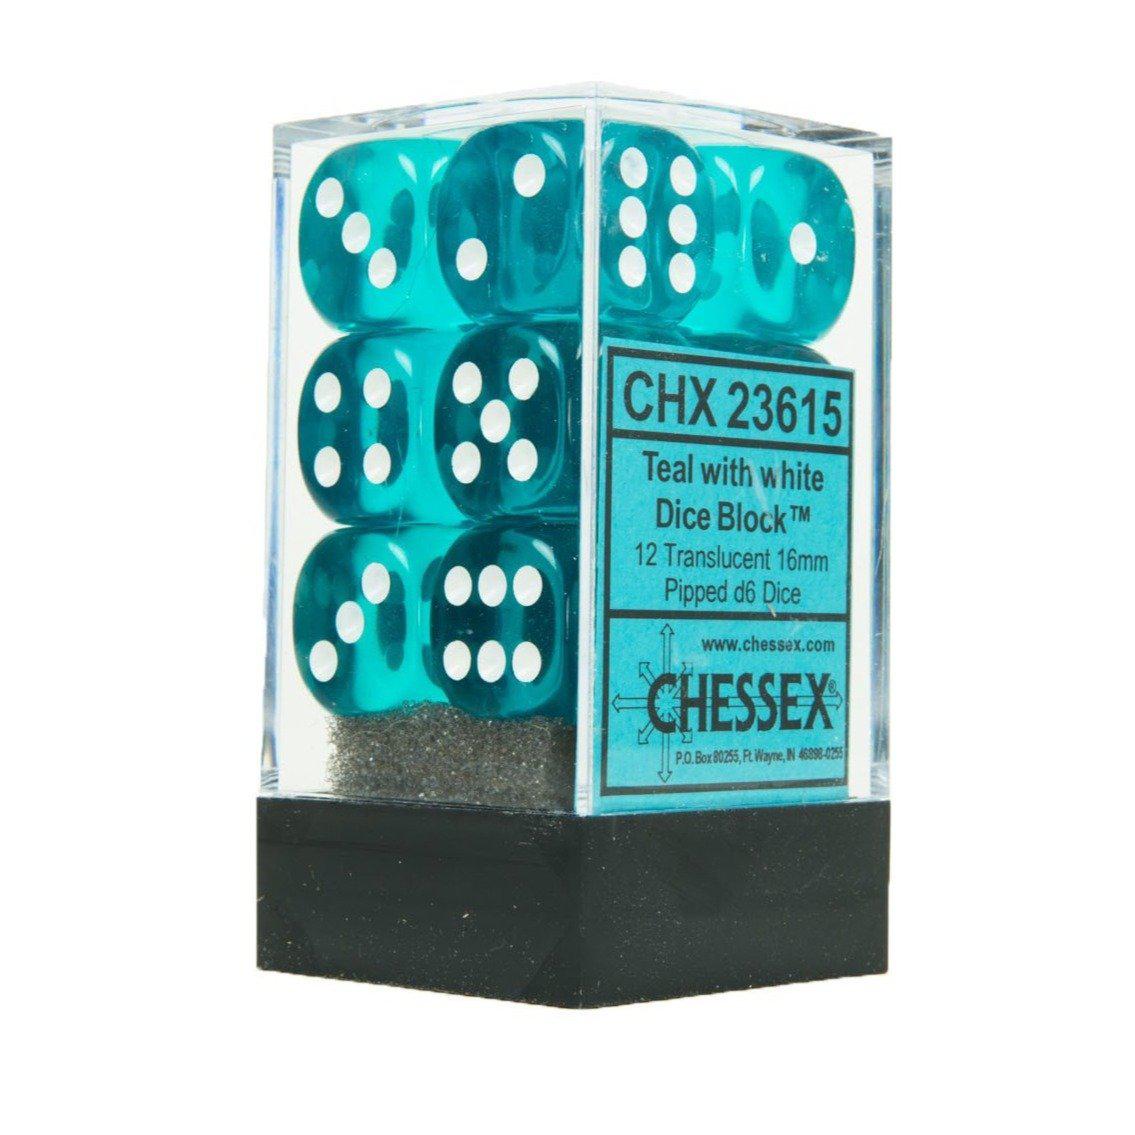 Chessex Translucent 16mm d6 12pcs Dice (Teal/White) [CHX23615]-Chessex-Ace Cards & Collectibles